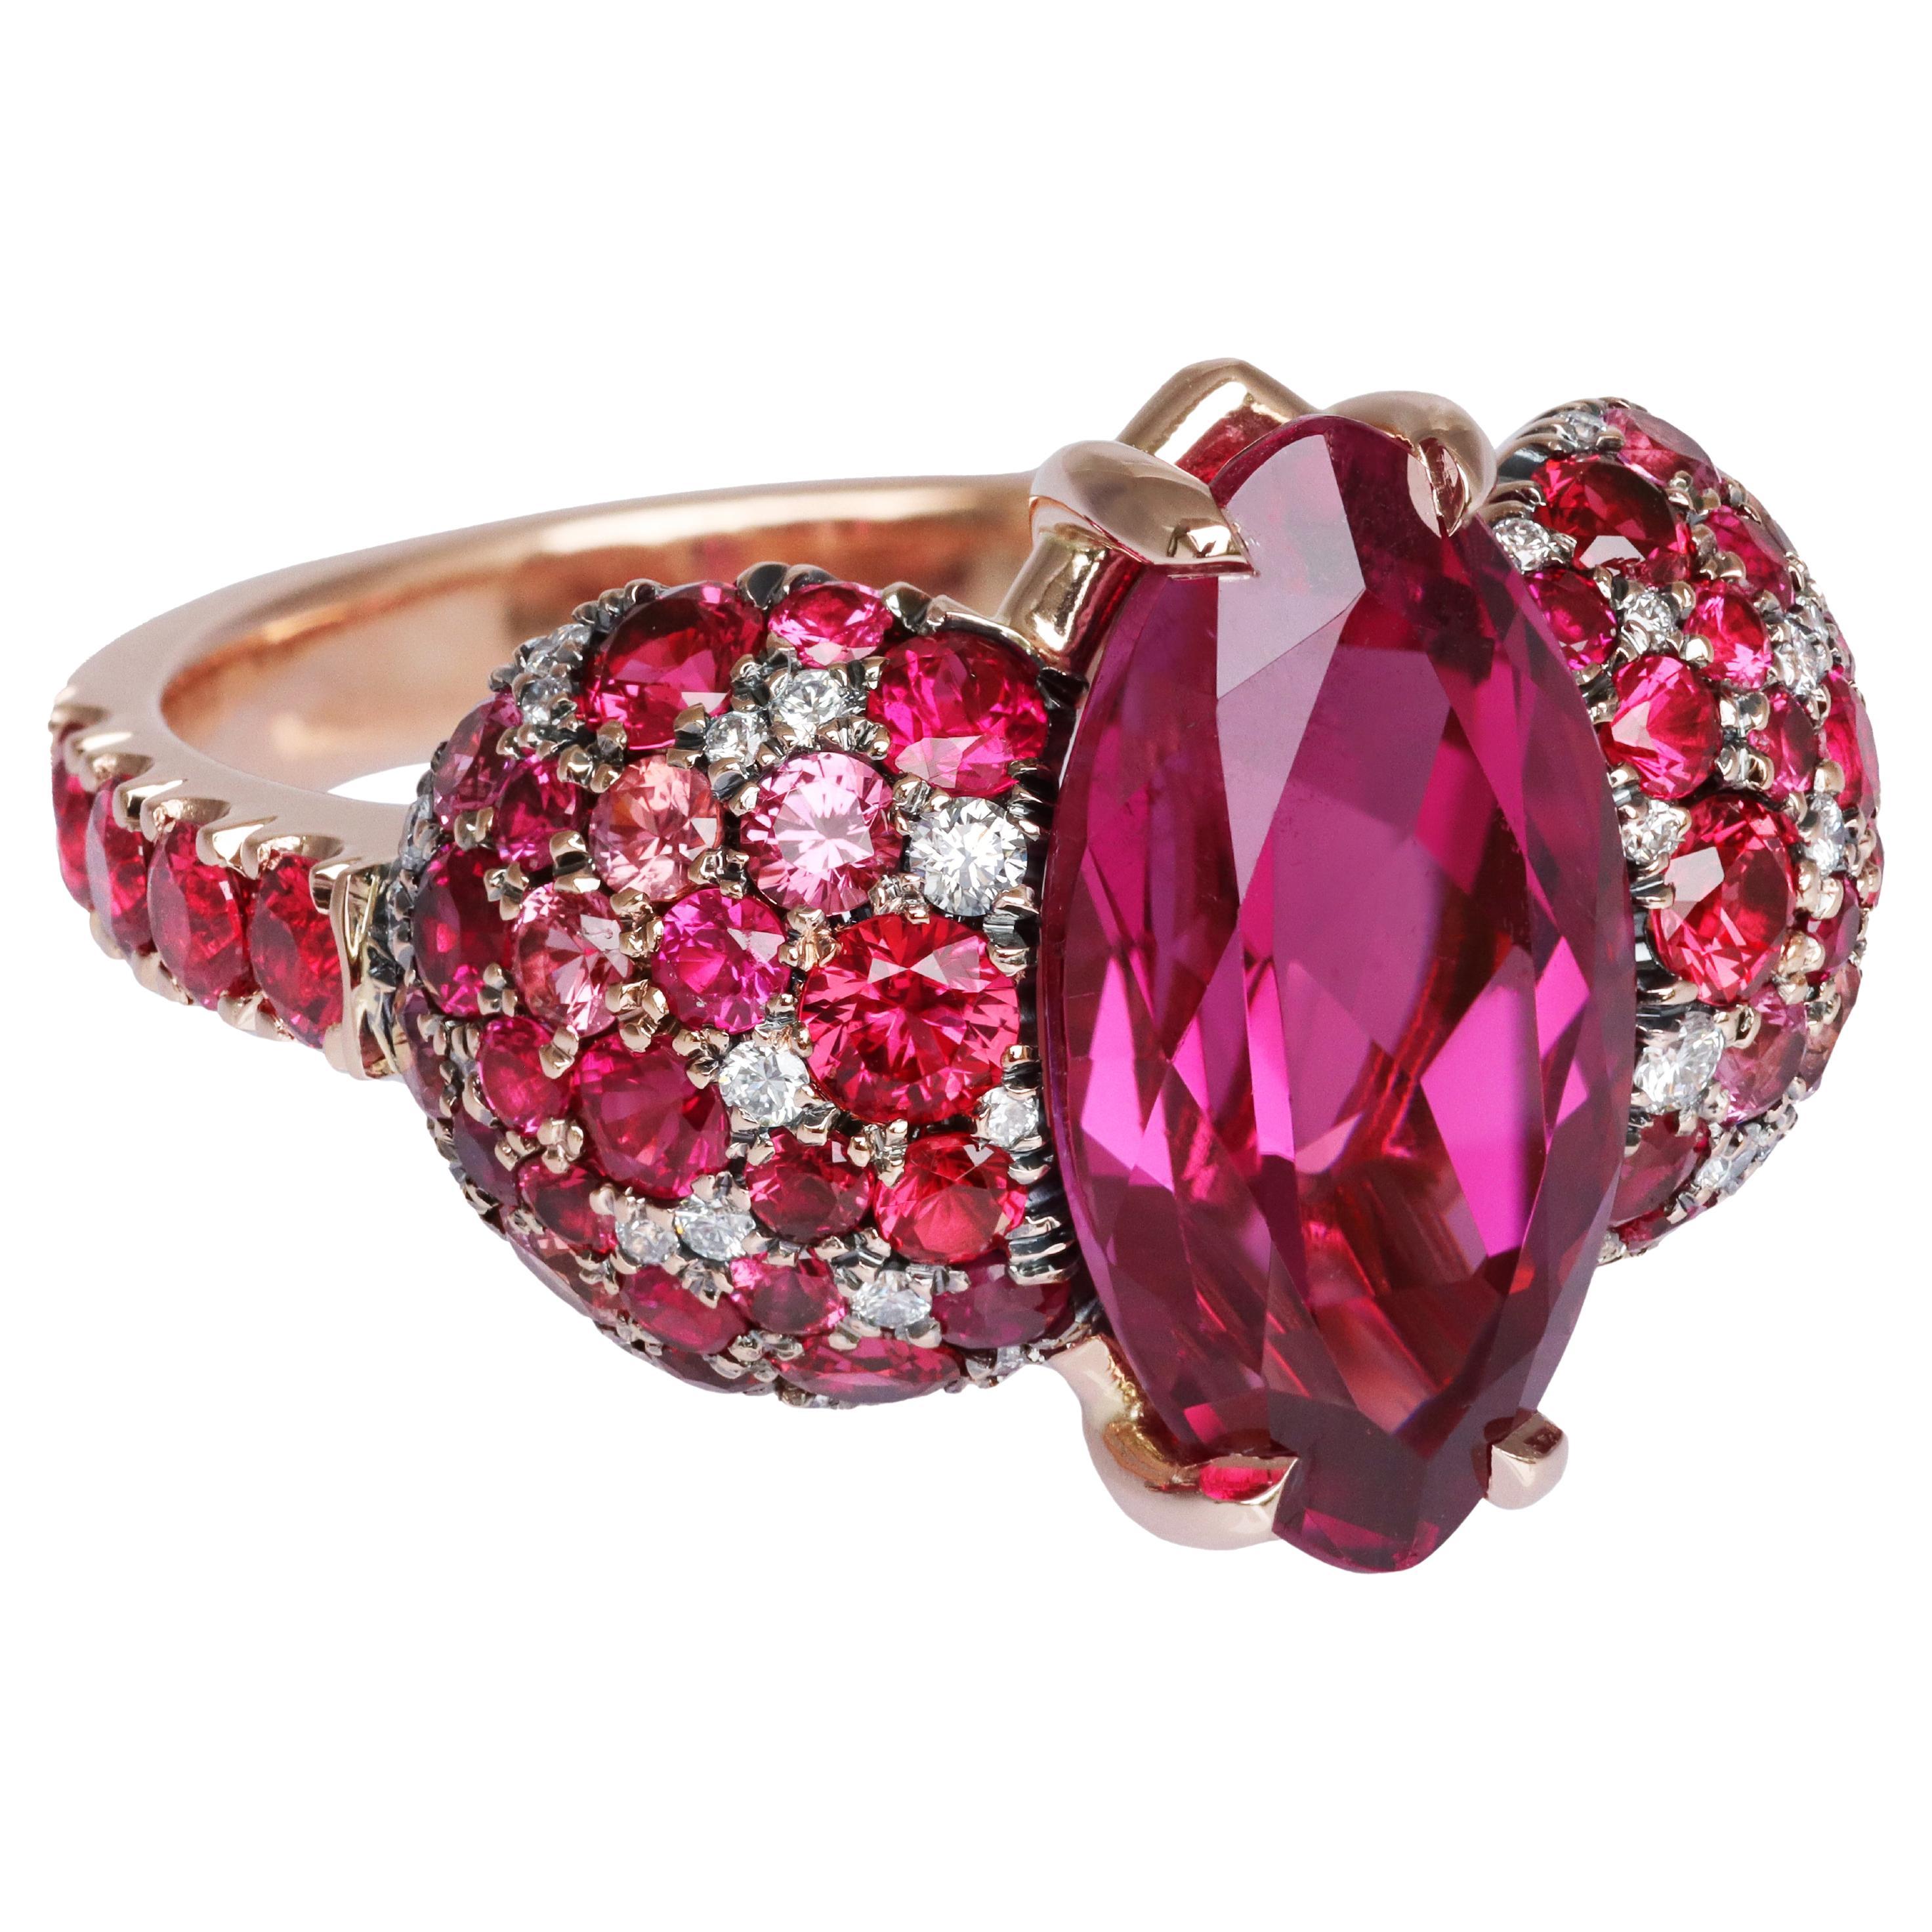 Joke Quick Rubellit Rubin Rot Spinell Padparadscha Saphir Coctail Ring